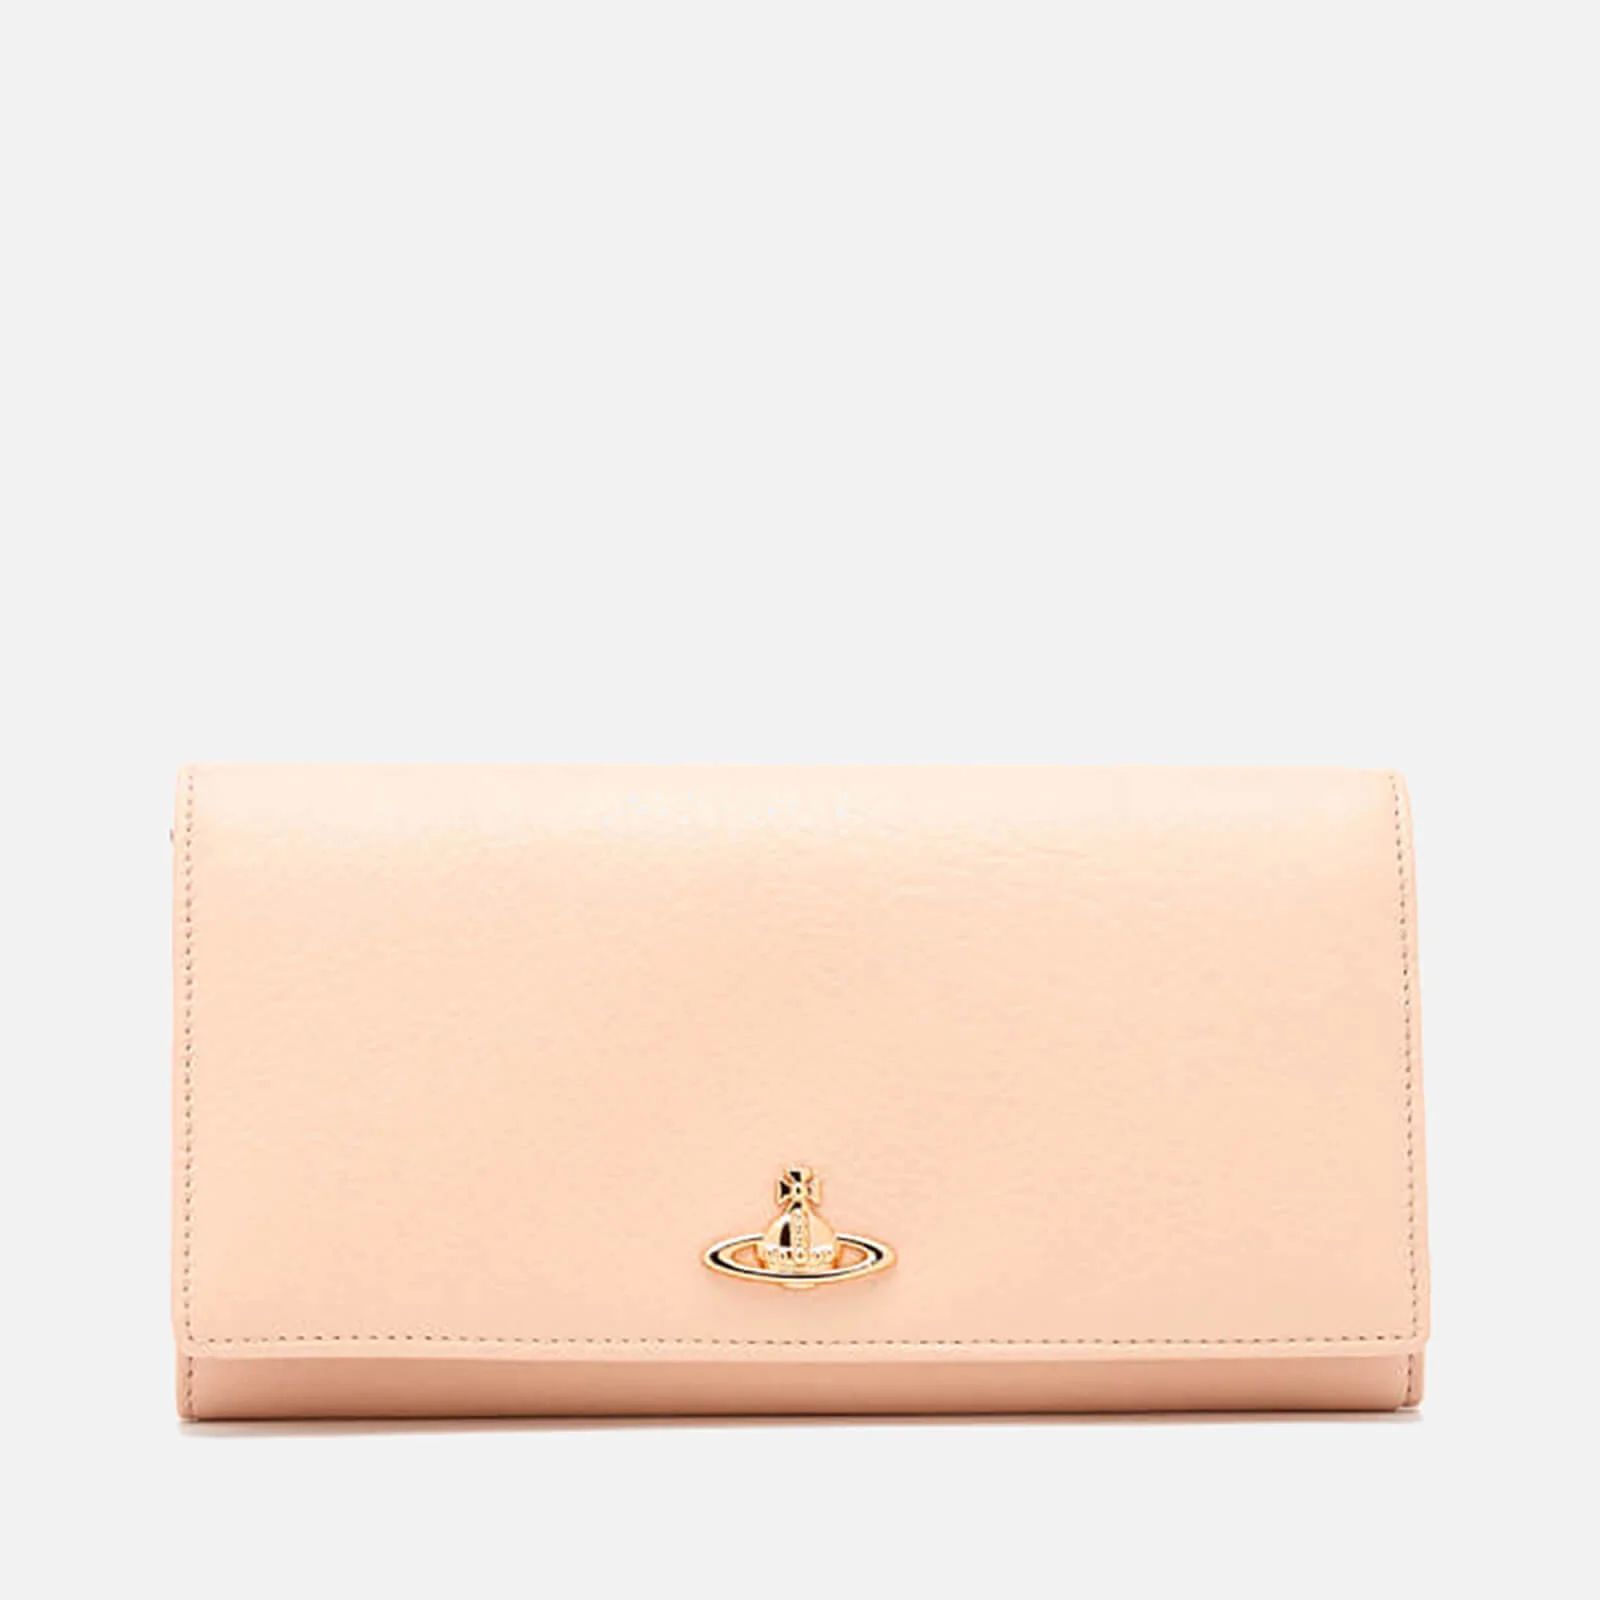 Vivienne Westwood Women's Balmoral Grain Leather Long Wallet with Chain - Pink Image 1